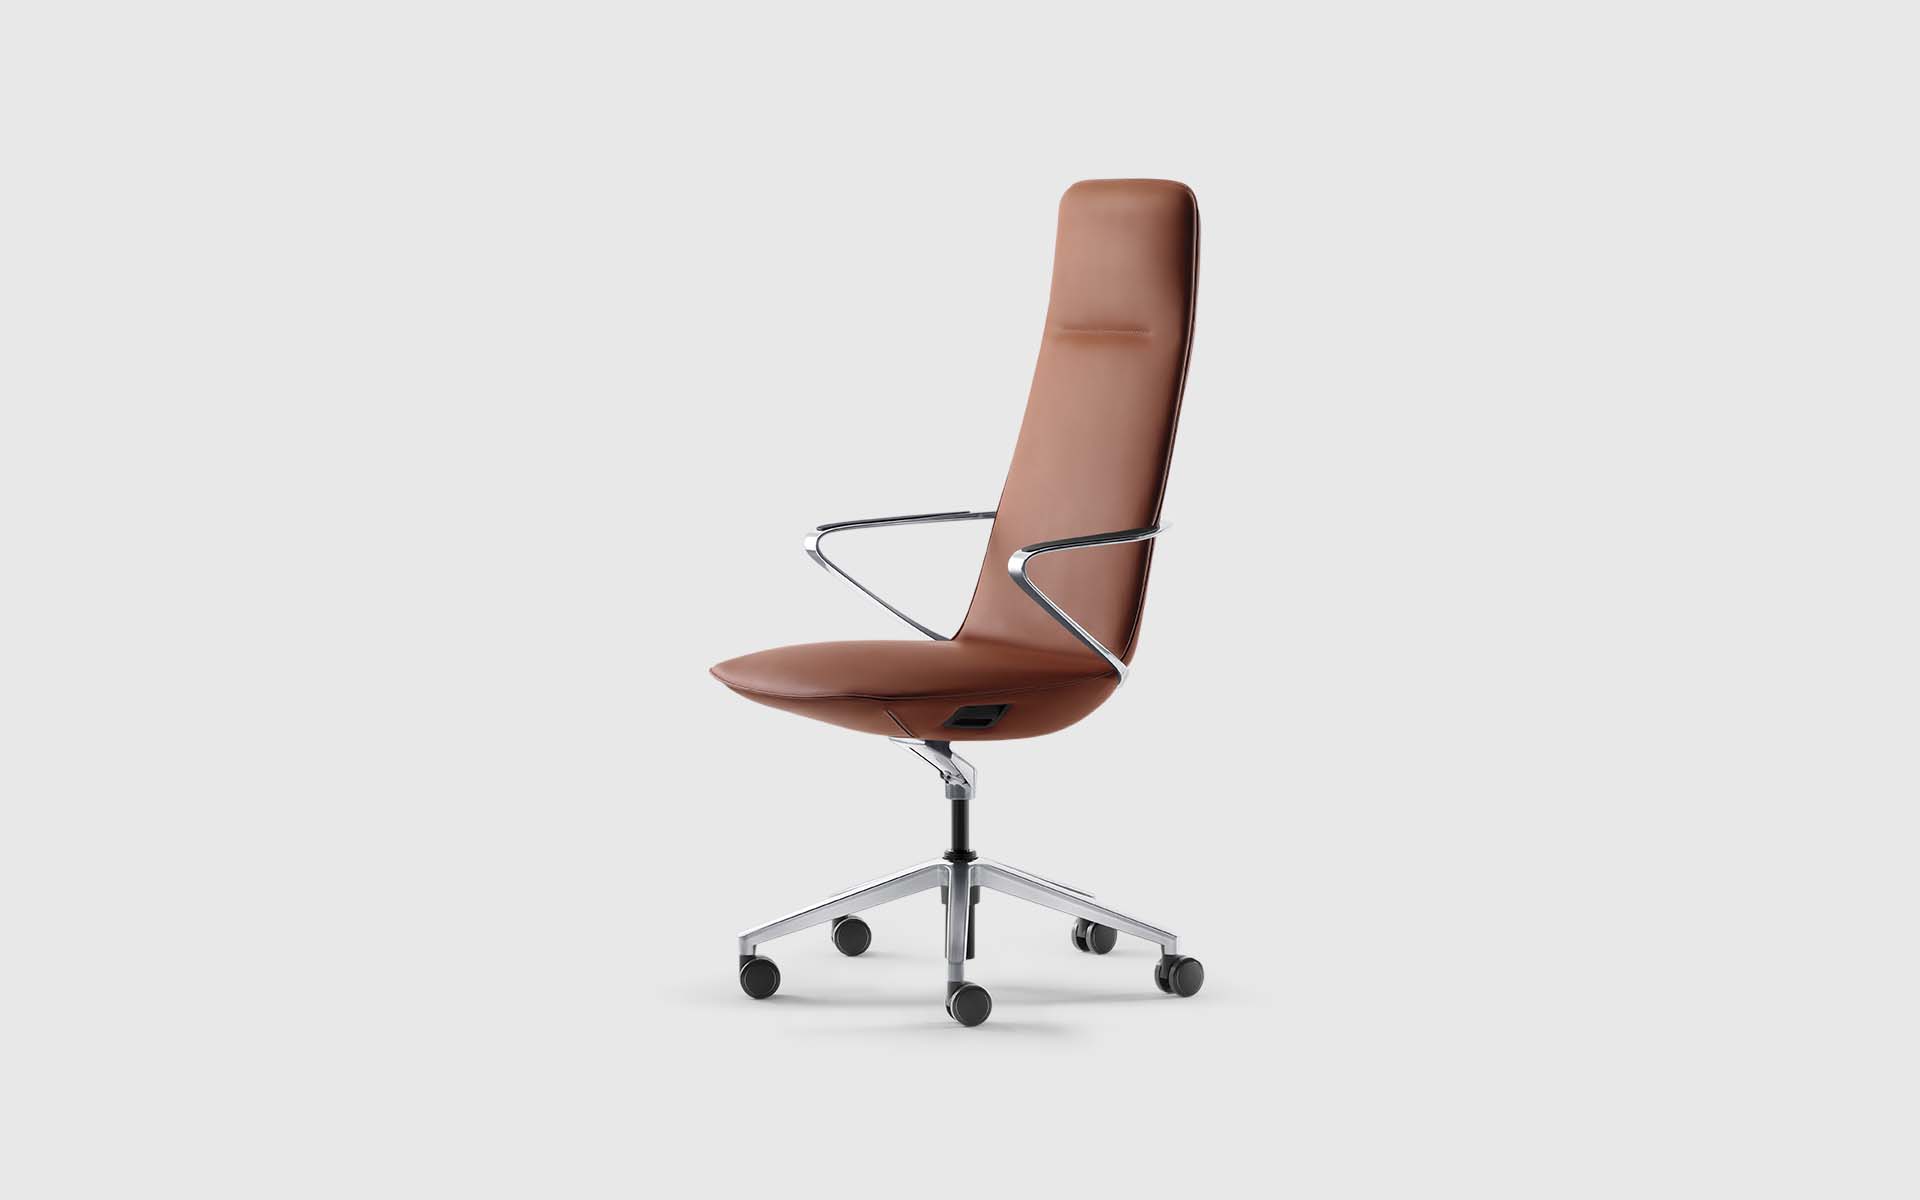 Goodtone Amola leather chair by ITO Design in brown